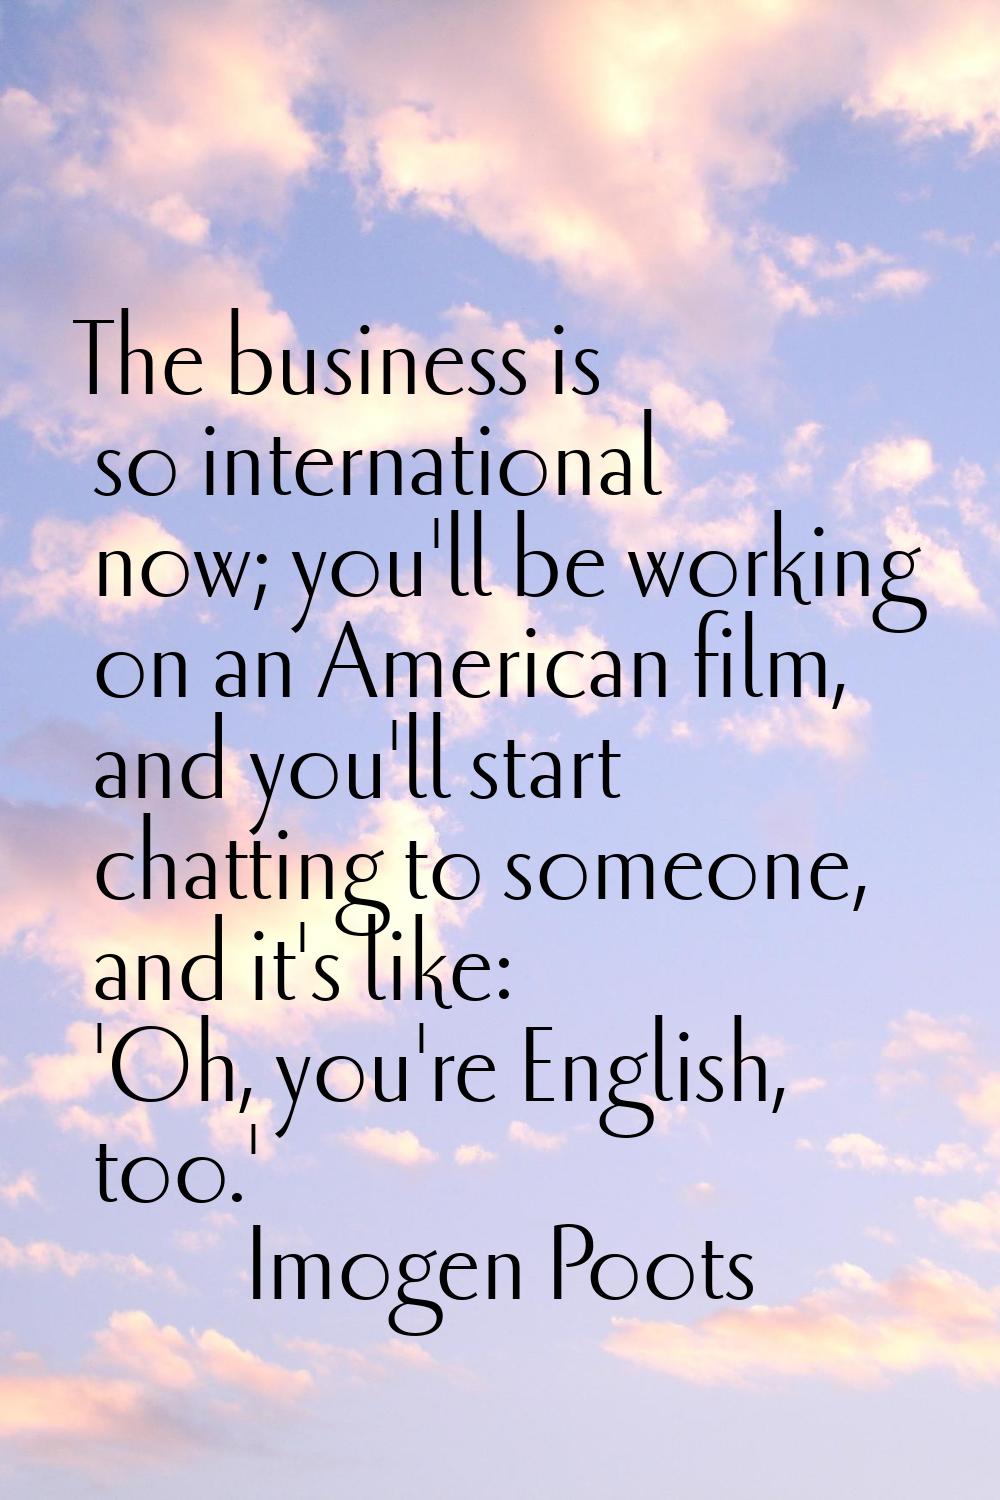 The business is so international now; you'll be working on an American film, and you'll start chatt